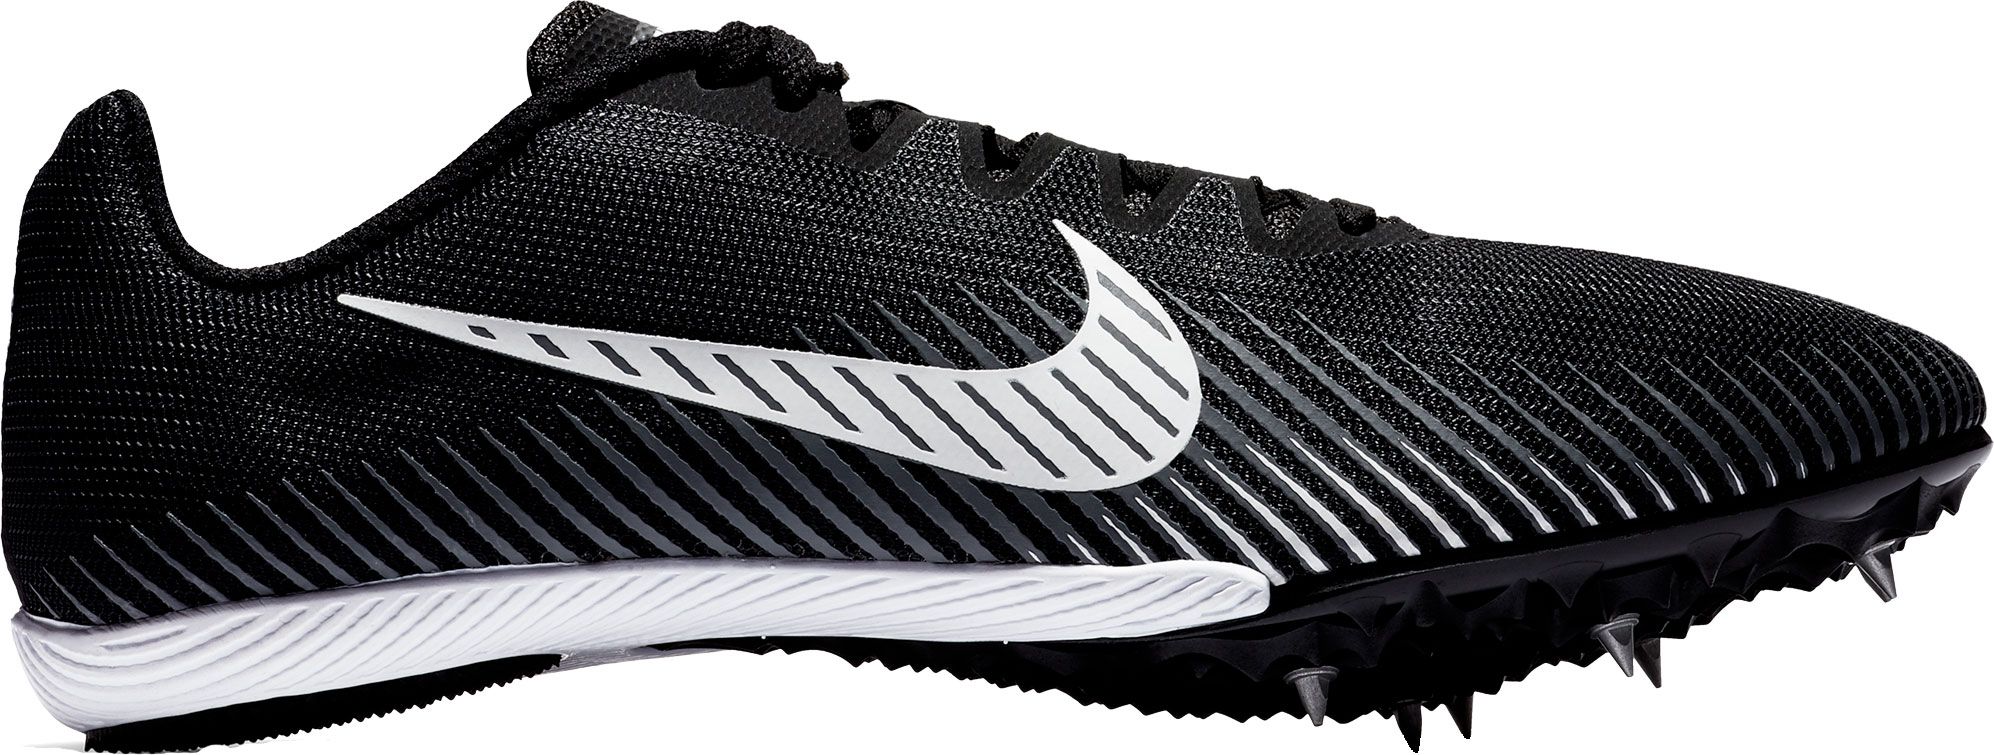 long distance track spikes